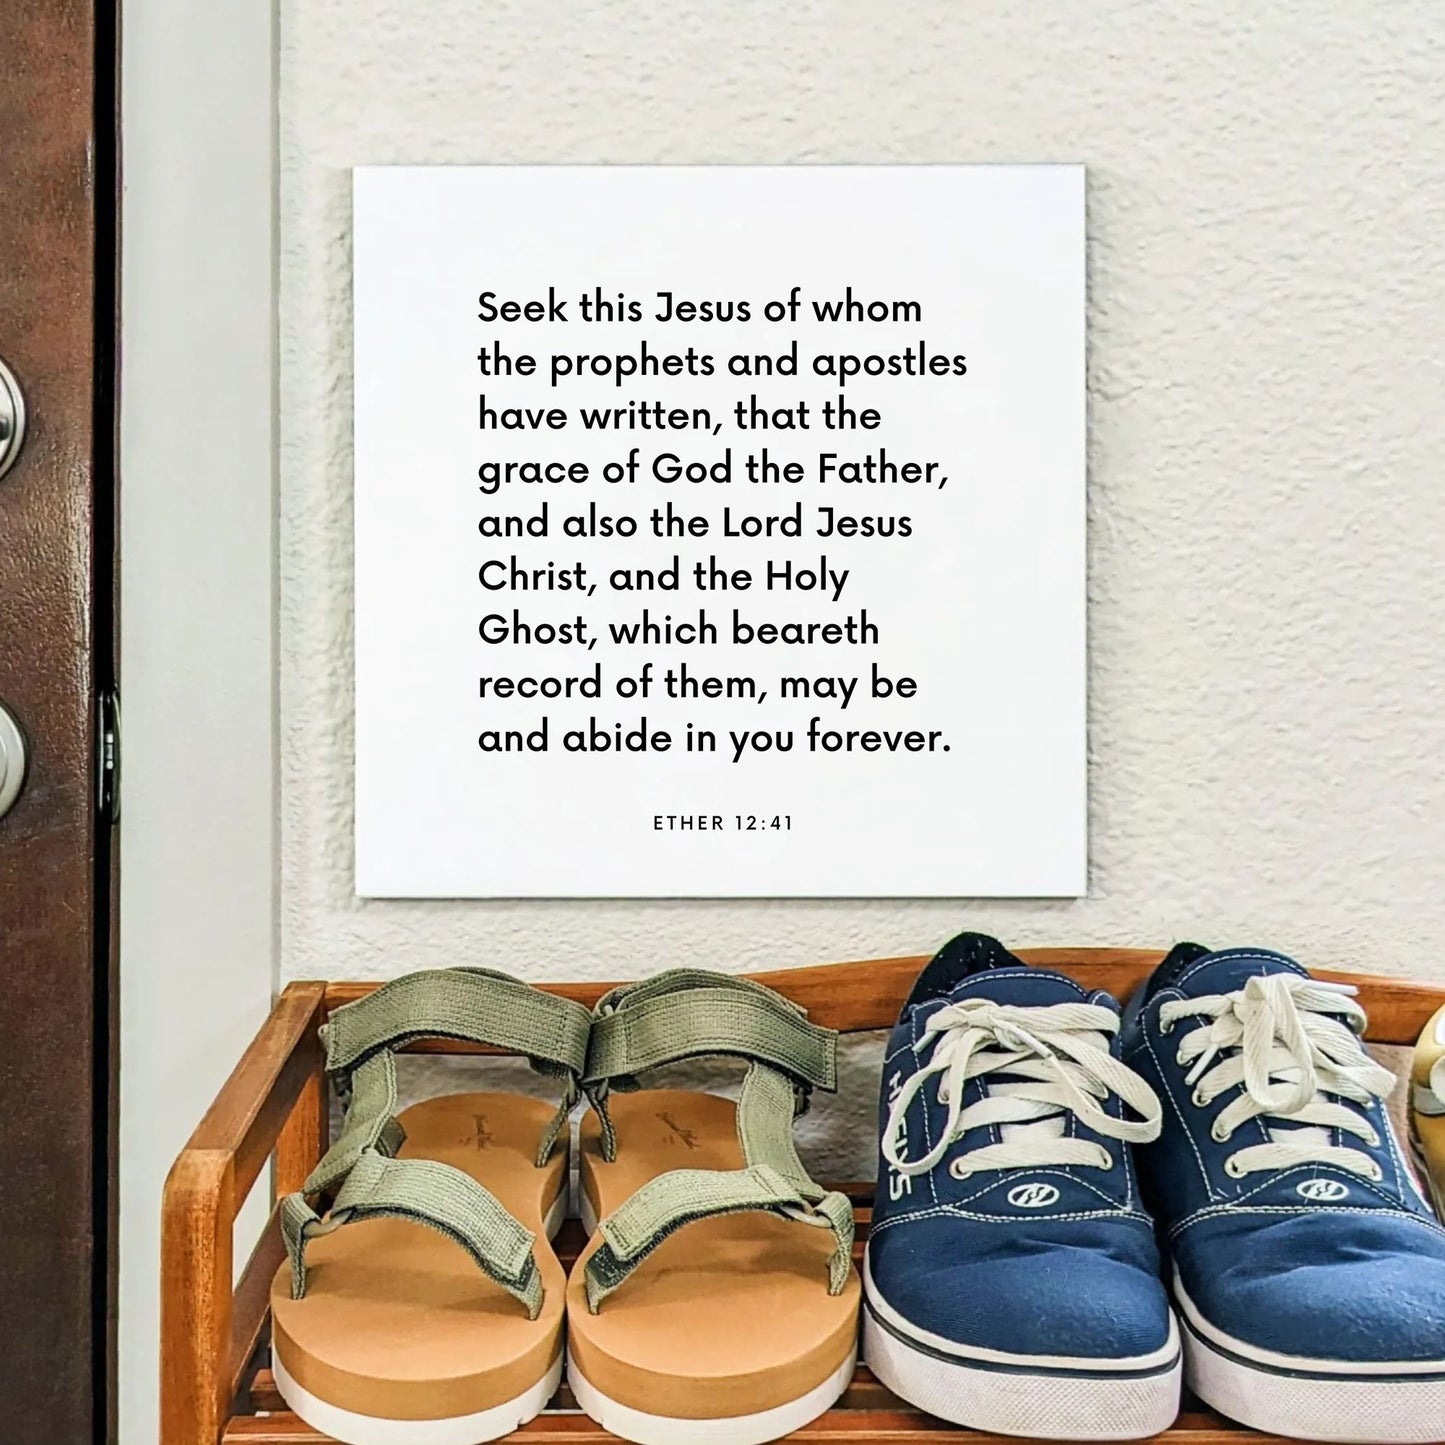 Shoes mouting of the scripture tile for Ether 12:41 - "Seek this Jesus of whom the prophets have written"